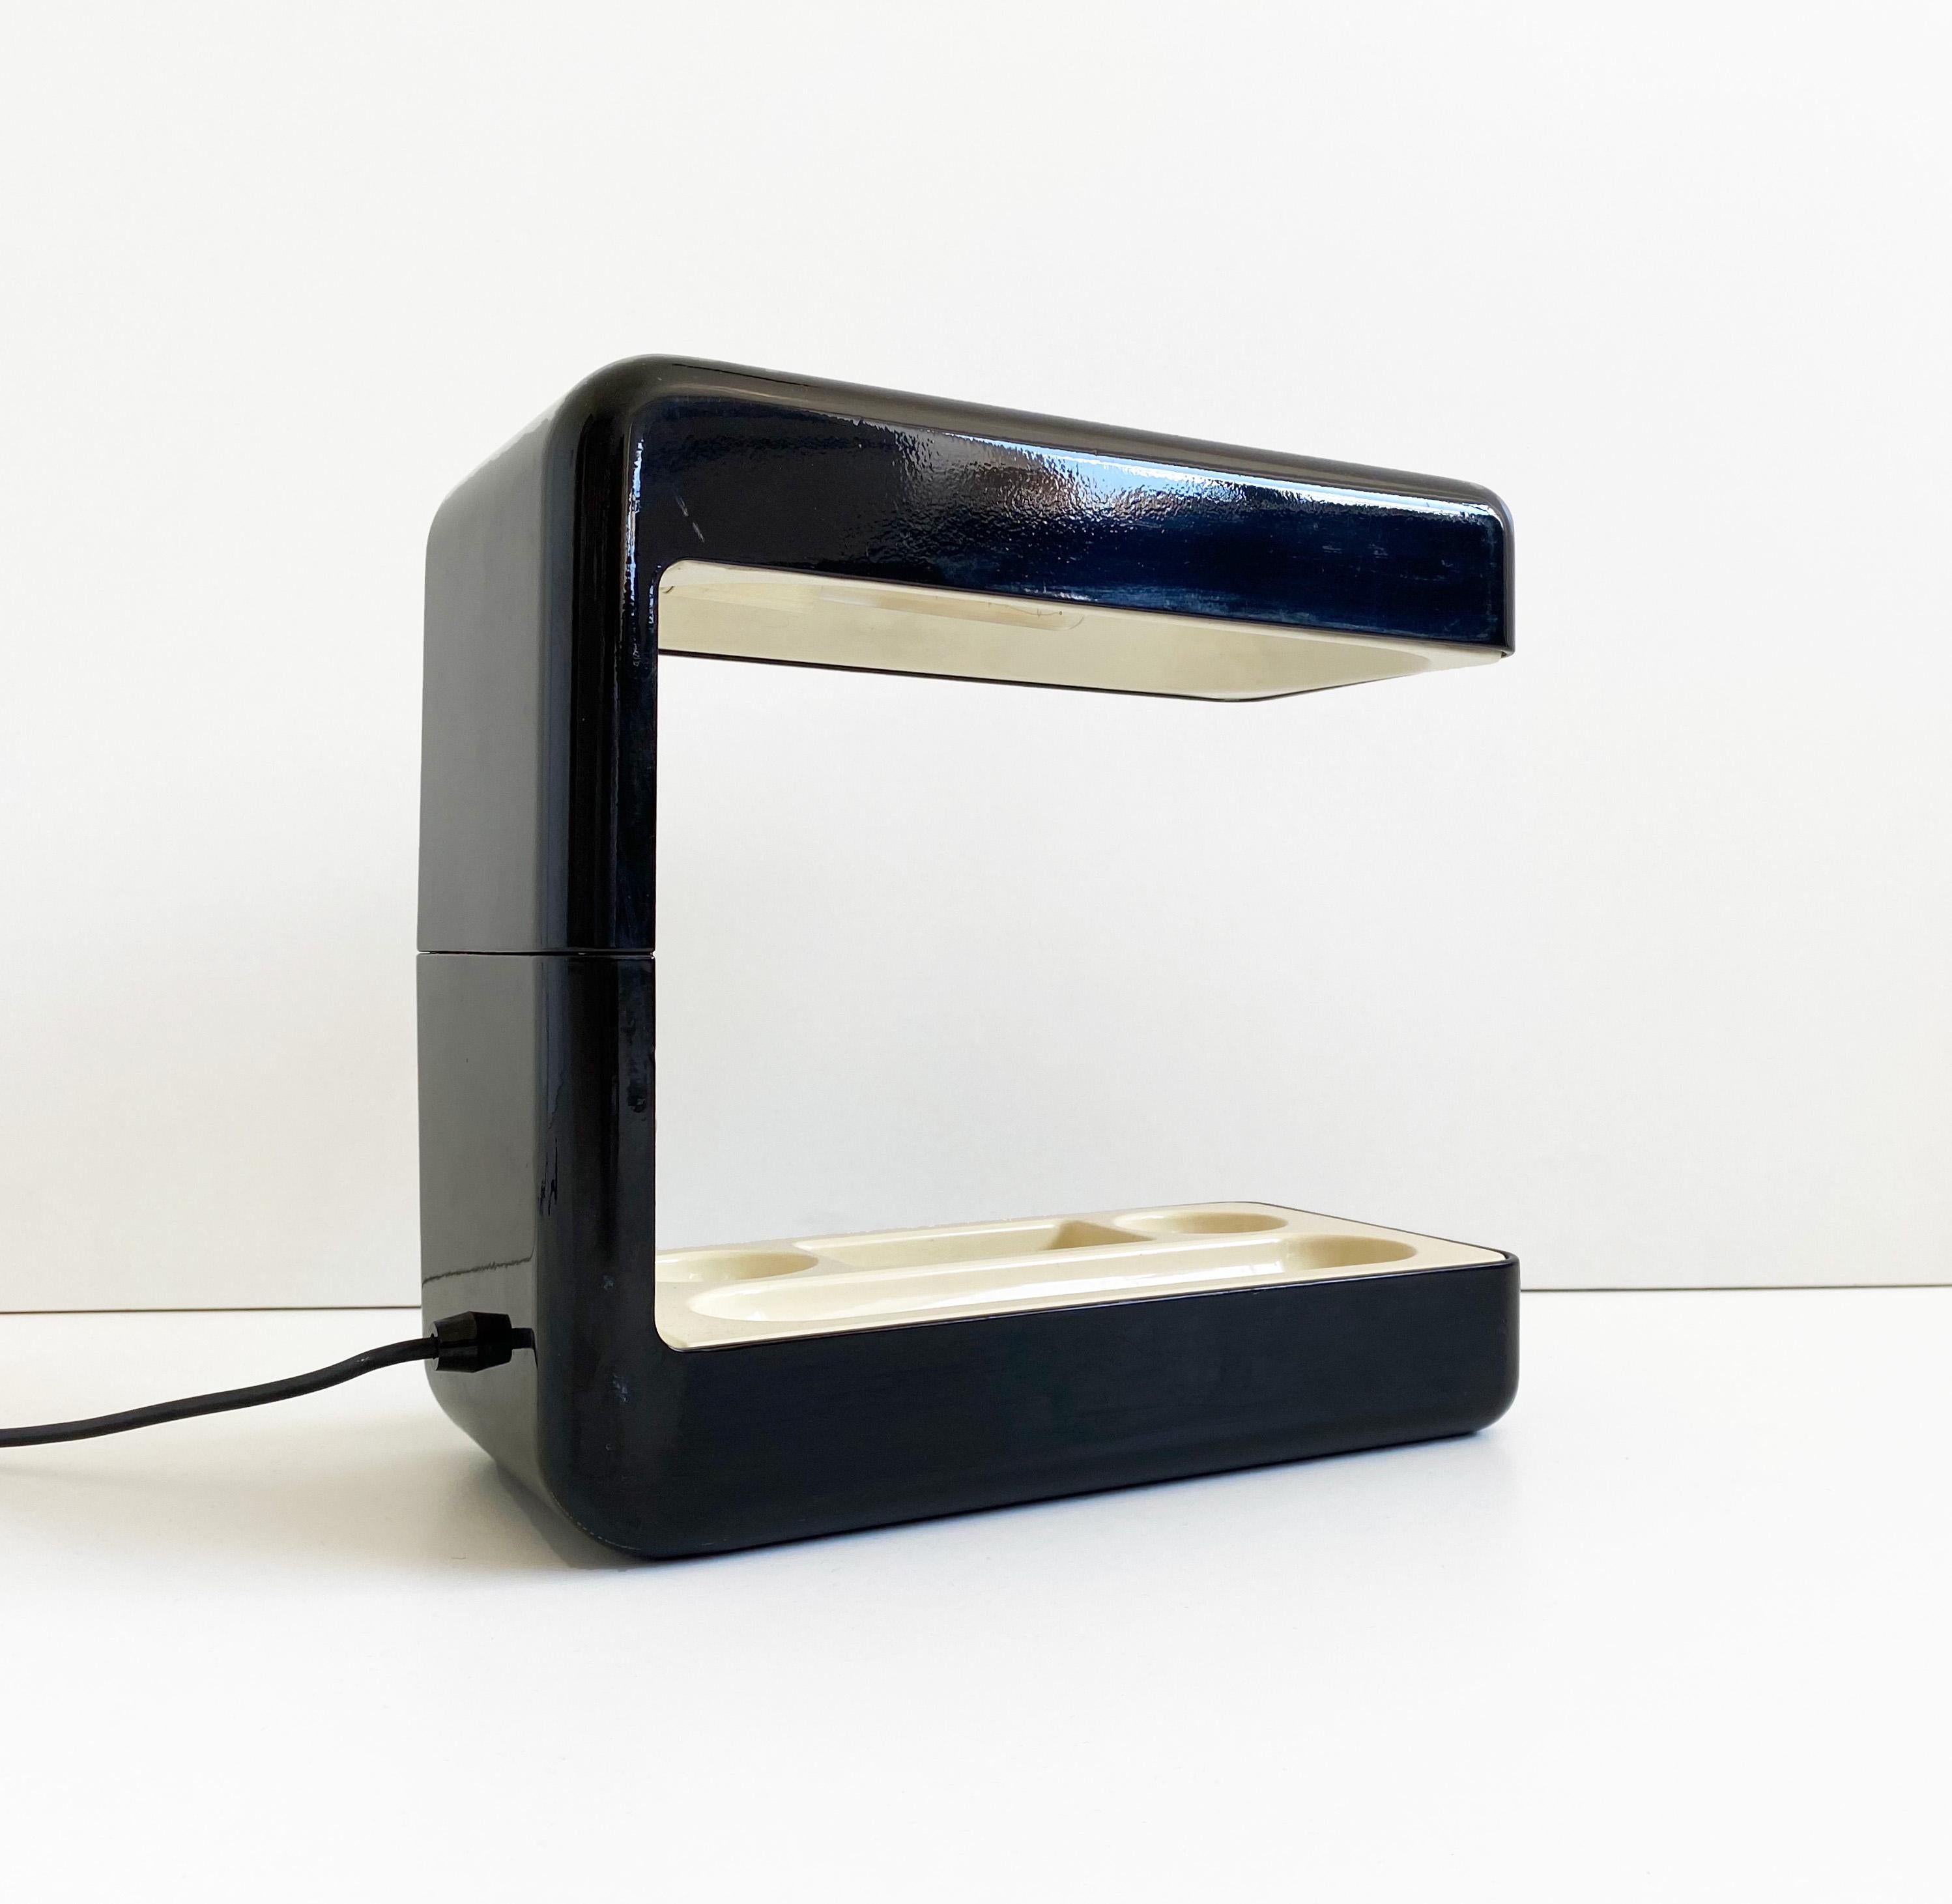 Lack Metal 'Isos' Desk Lamp by Giotto Stoppino, Italy, c.1970 In Good Condition For Sale In Surbiton, GB